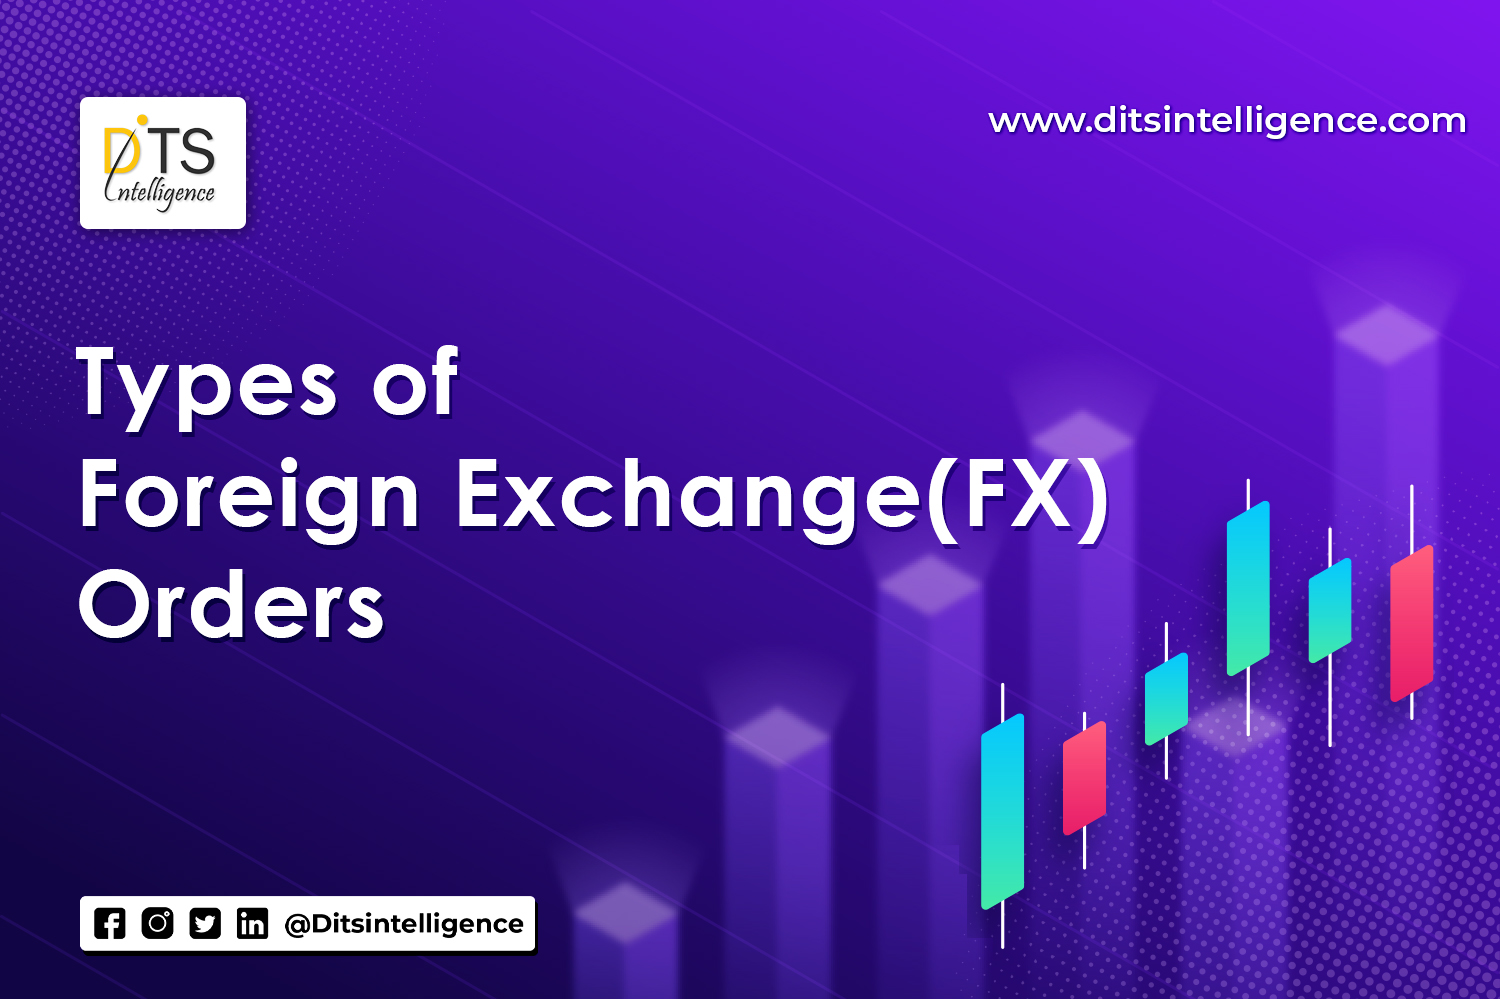 Types of Foreign Exchange (FX) Orders